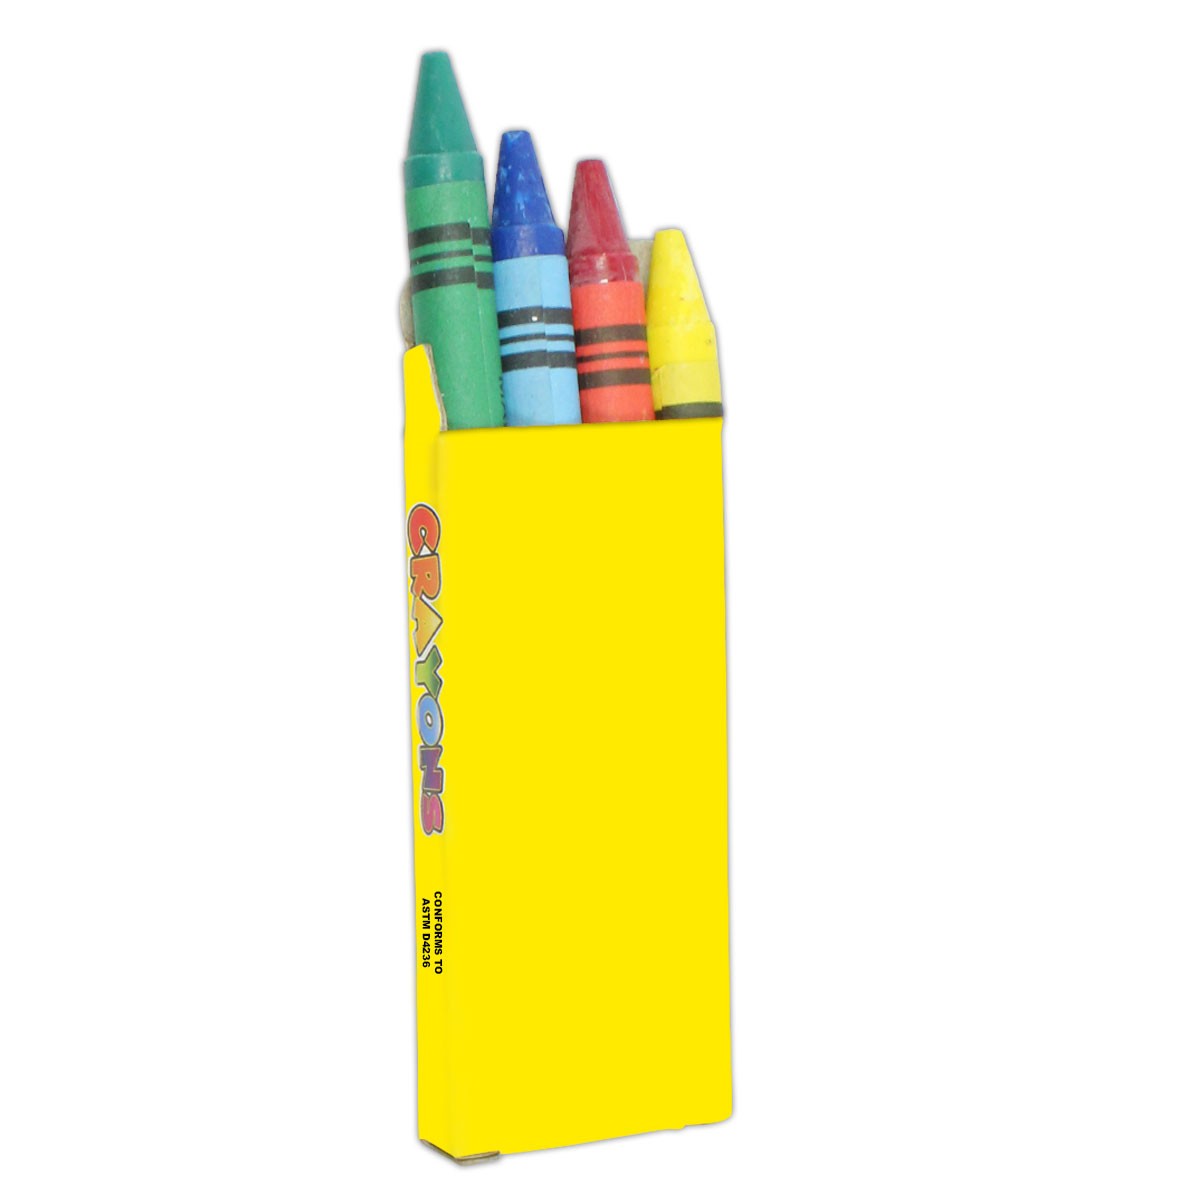 Colorful Creations Adult Crayons Bundle Pack,yellow,ONE SIZE